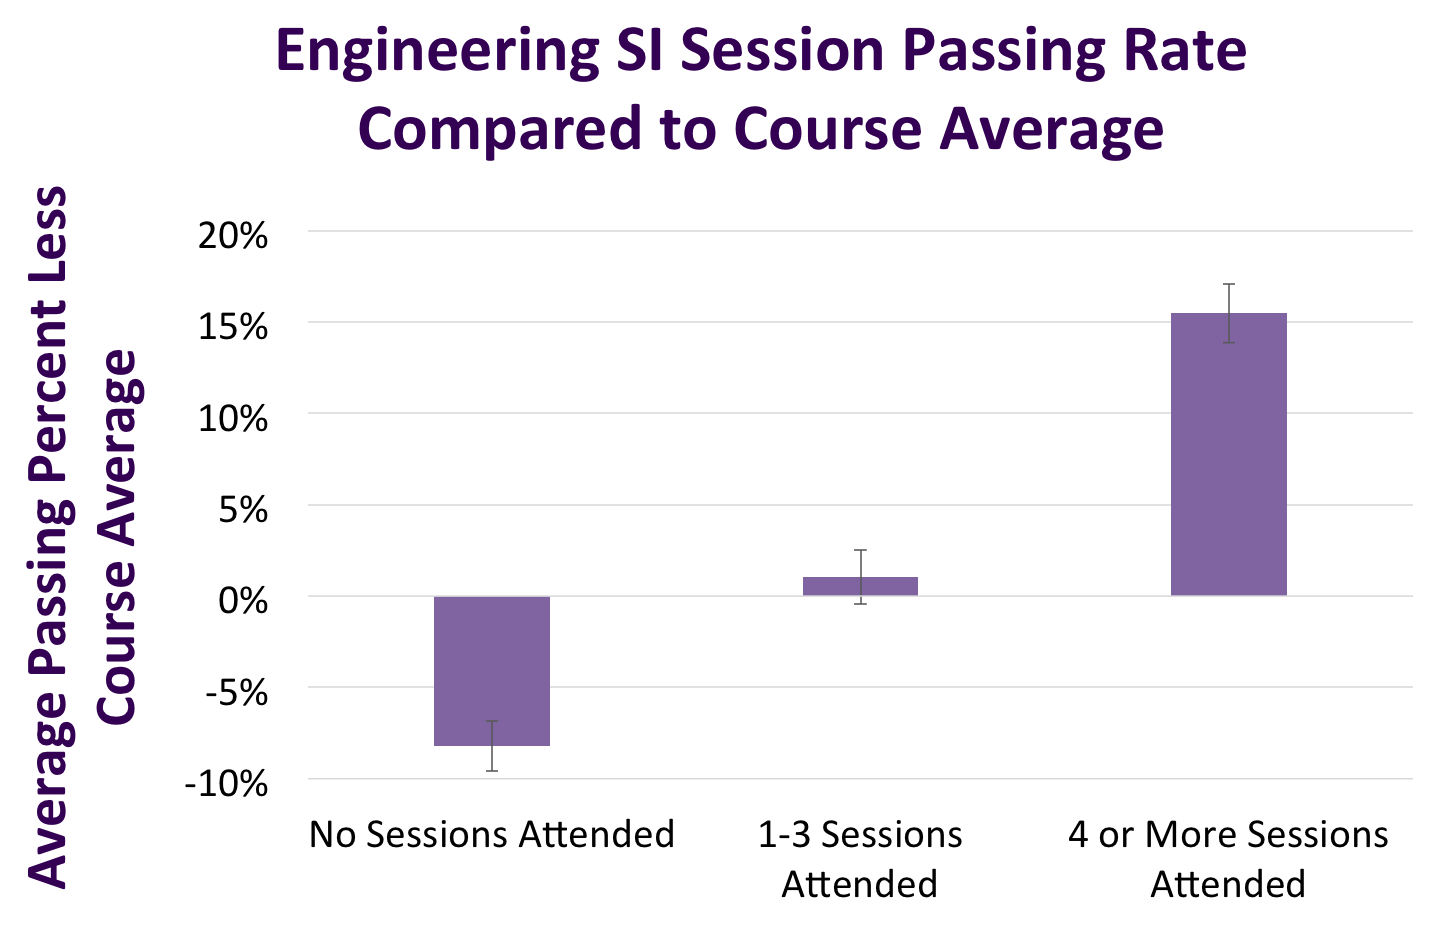 Graph of passing rate for students who attend SI sessions against those who do not for courses with SI sessions.